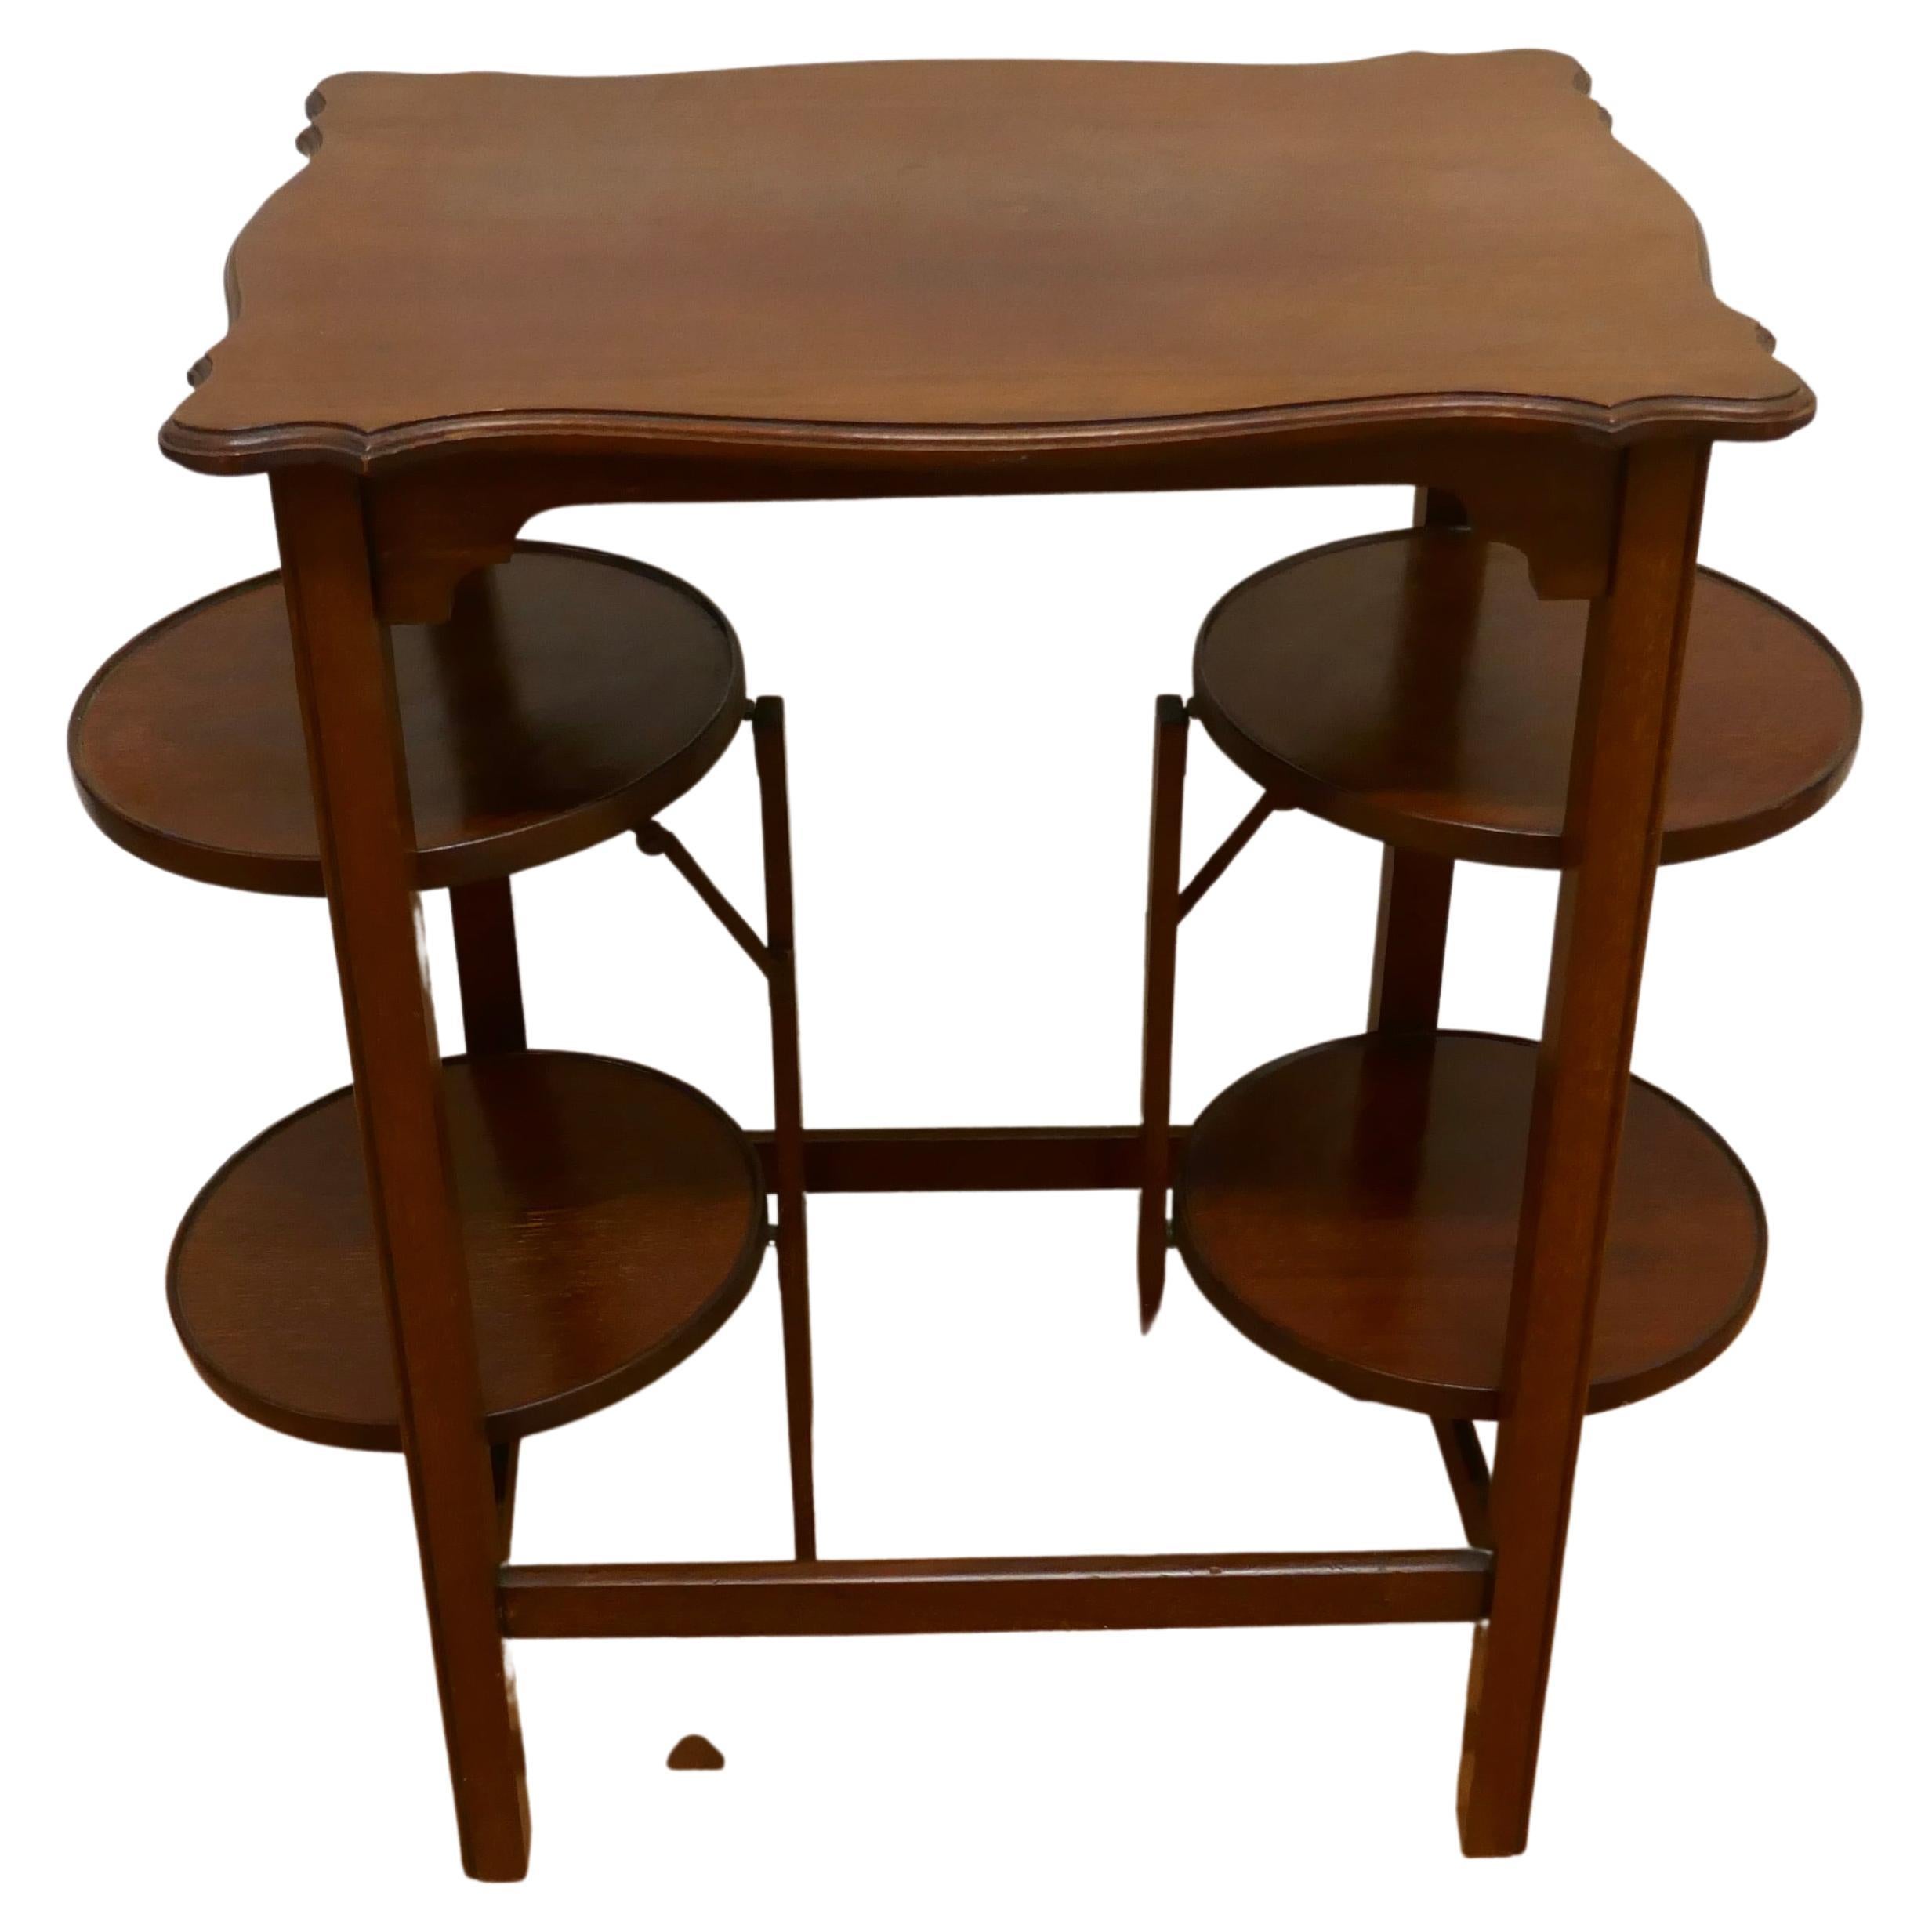 4 Tray Mahogany Table Cake Stand or Dumb Waiter For Sale